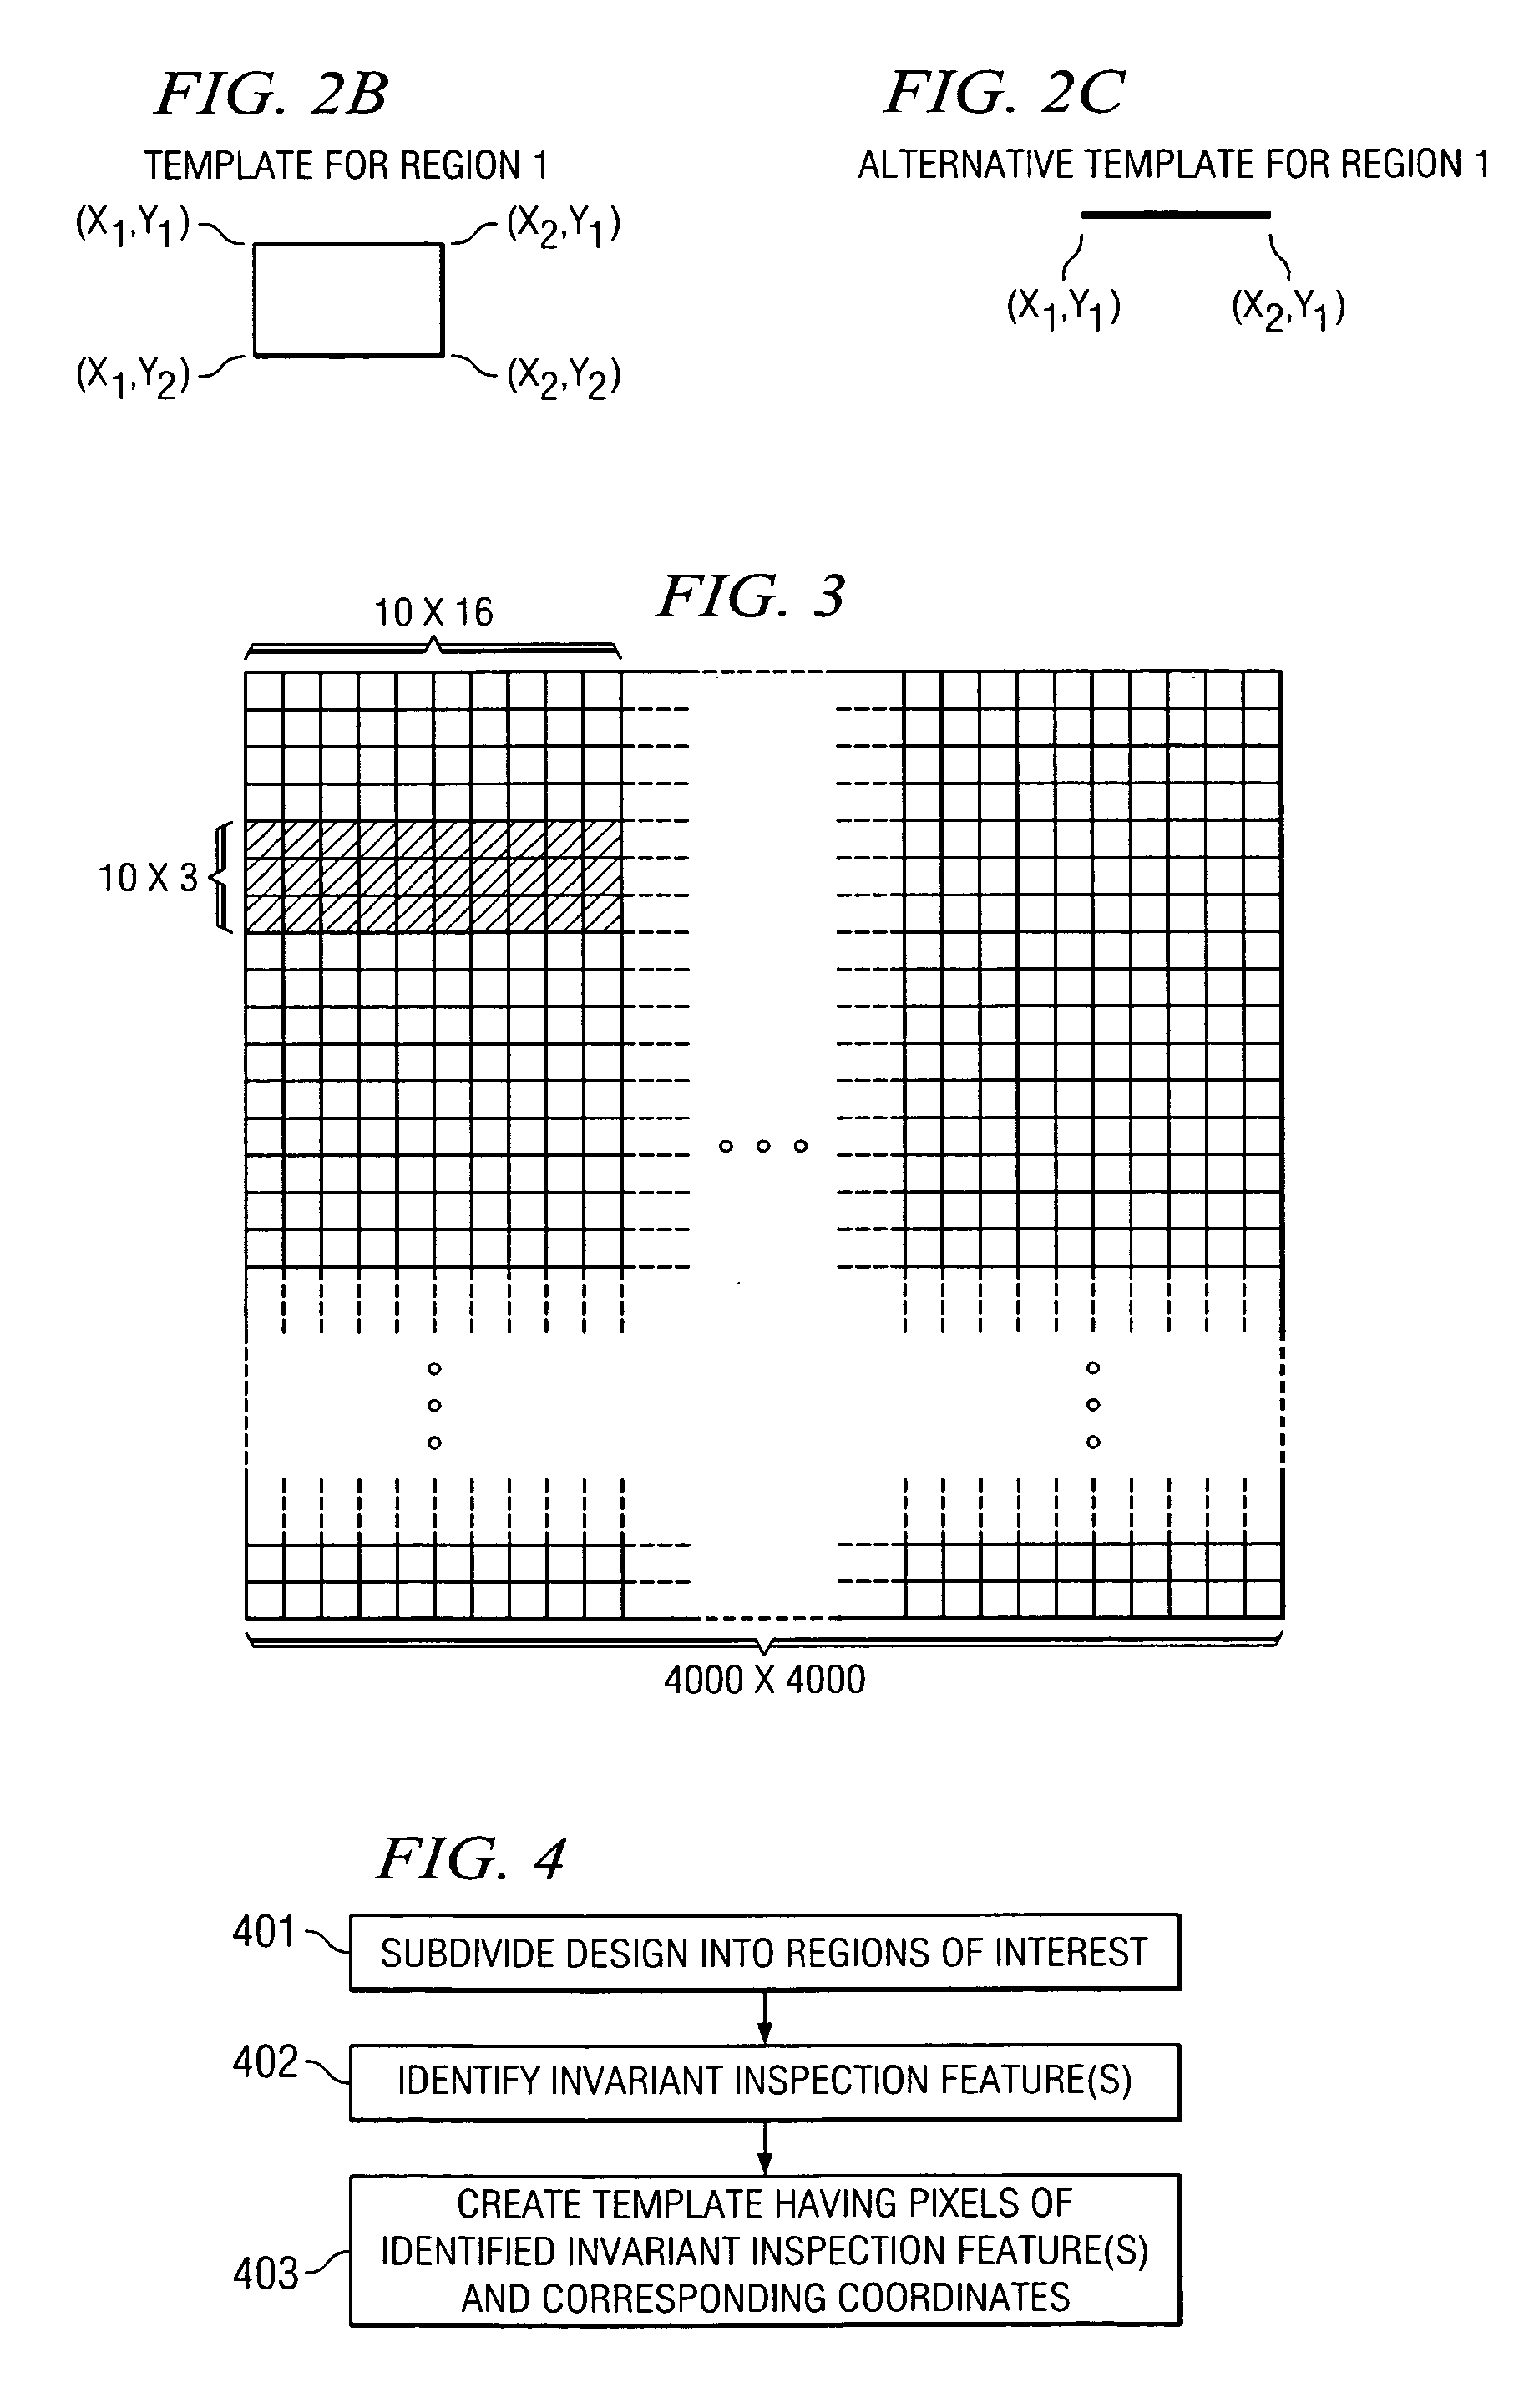 System and method for performing automated optical inspection of objects